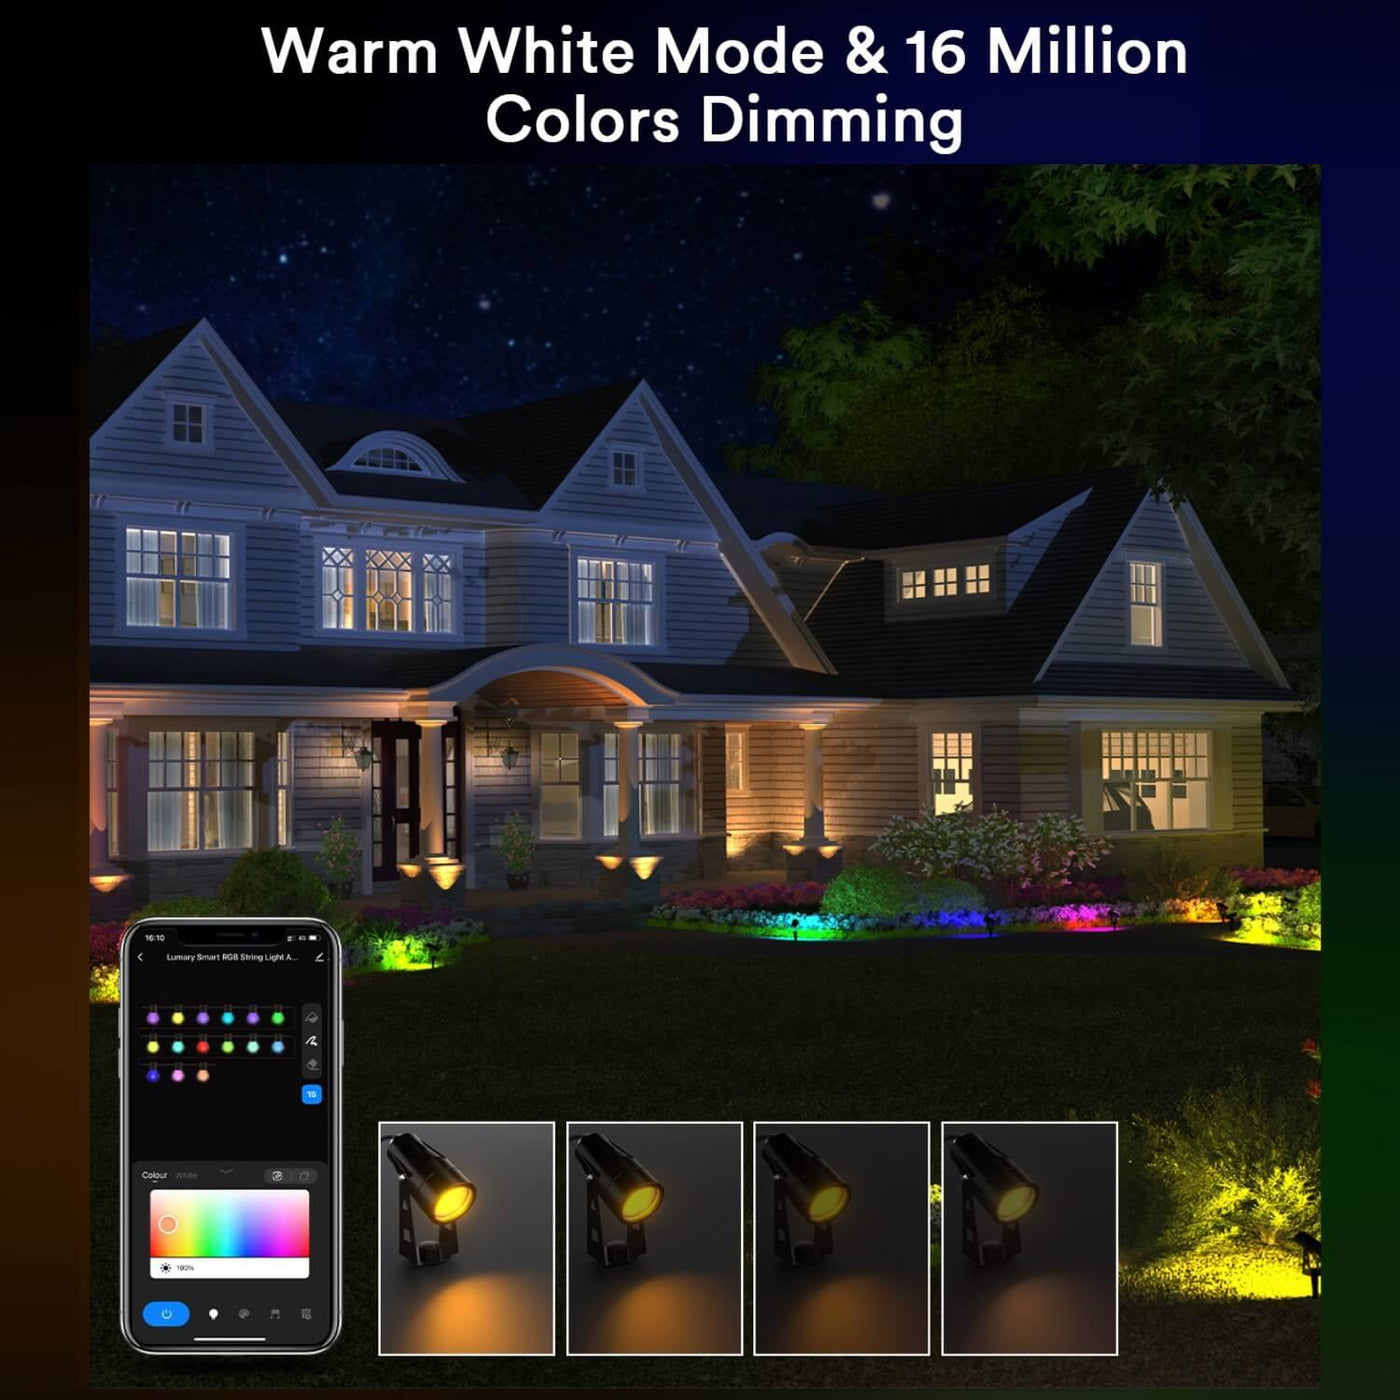 6 RGB LED Landscape Spot Lights Kit with Low Voltage Transformer -  Bluetooth and RF Remote Control